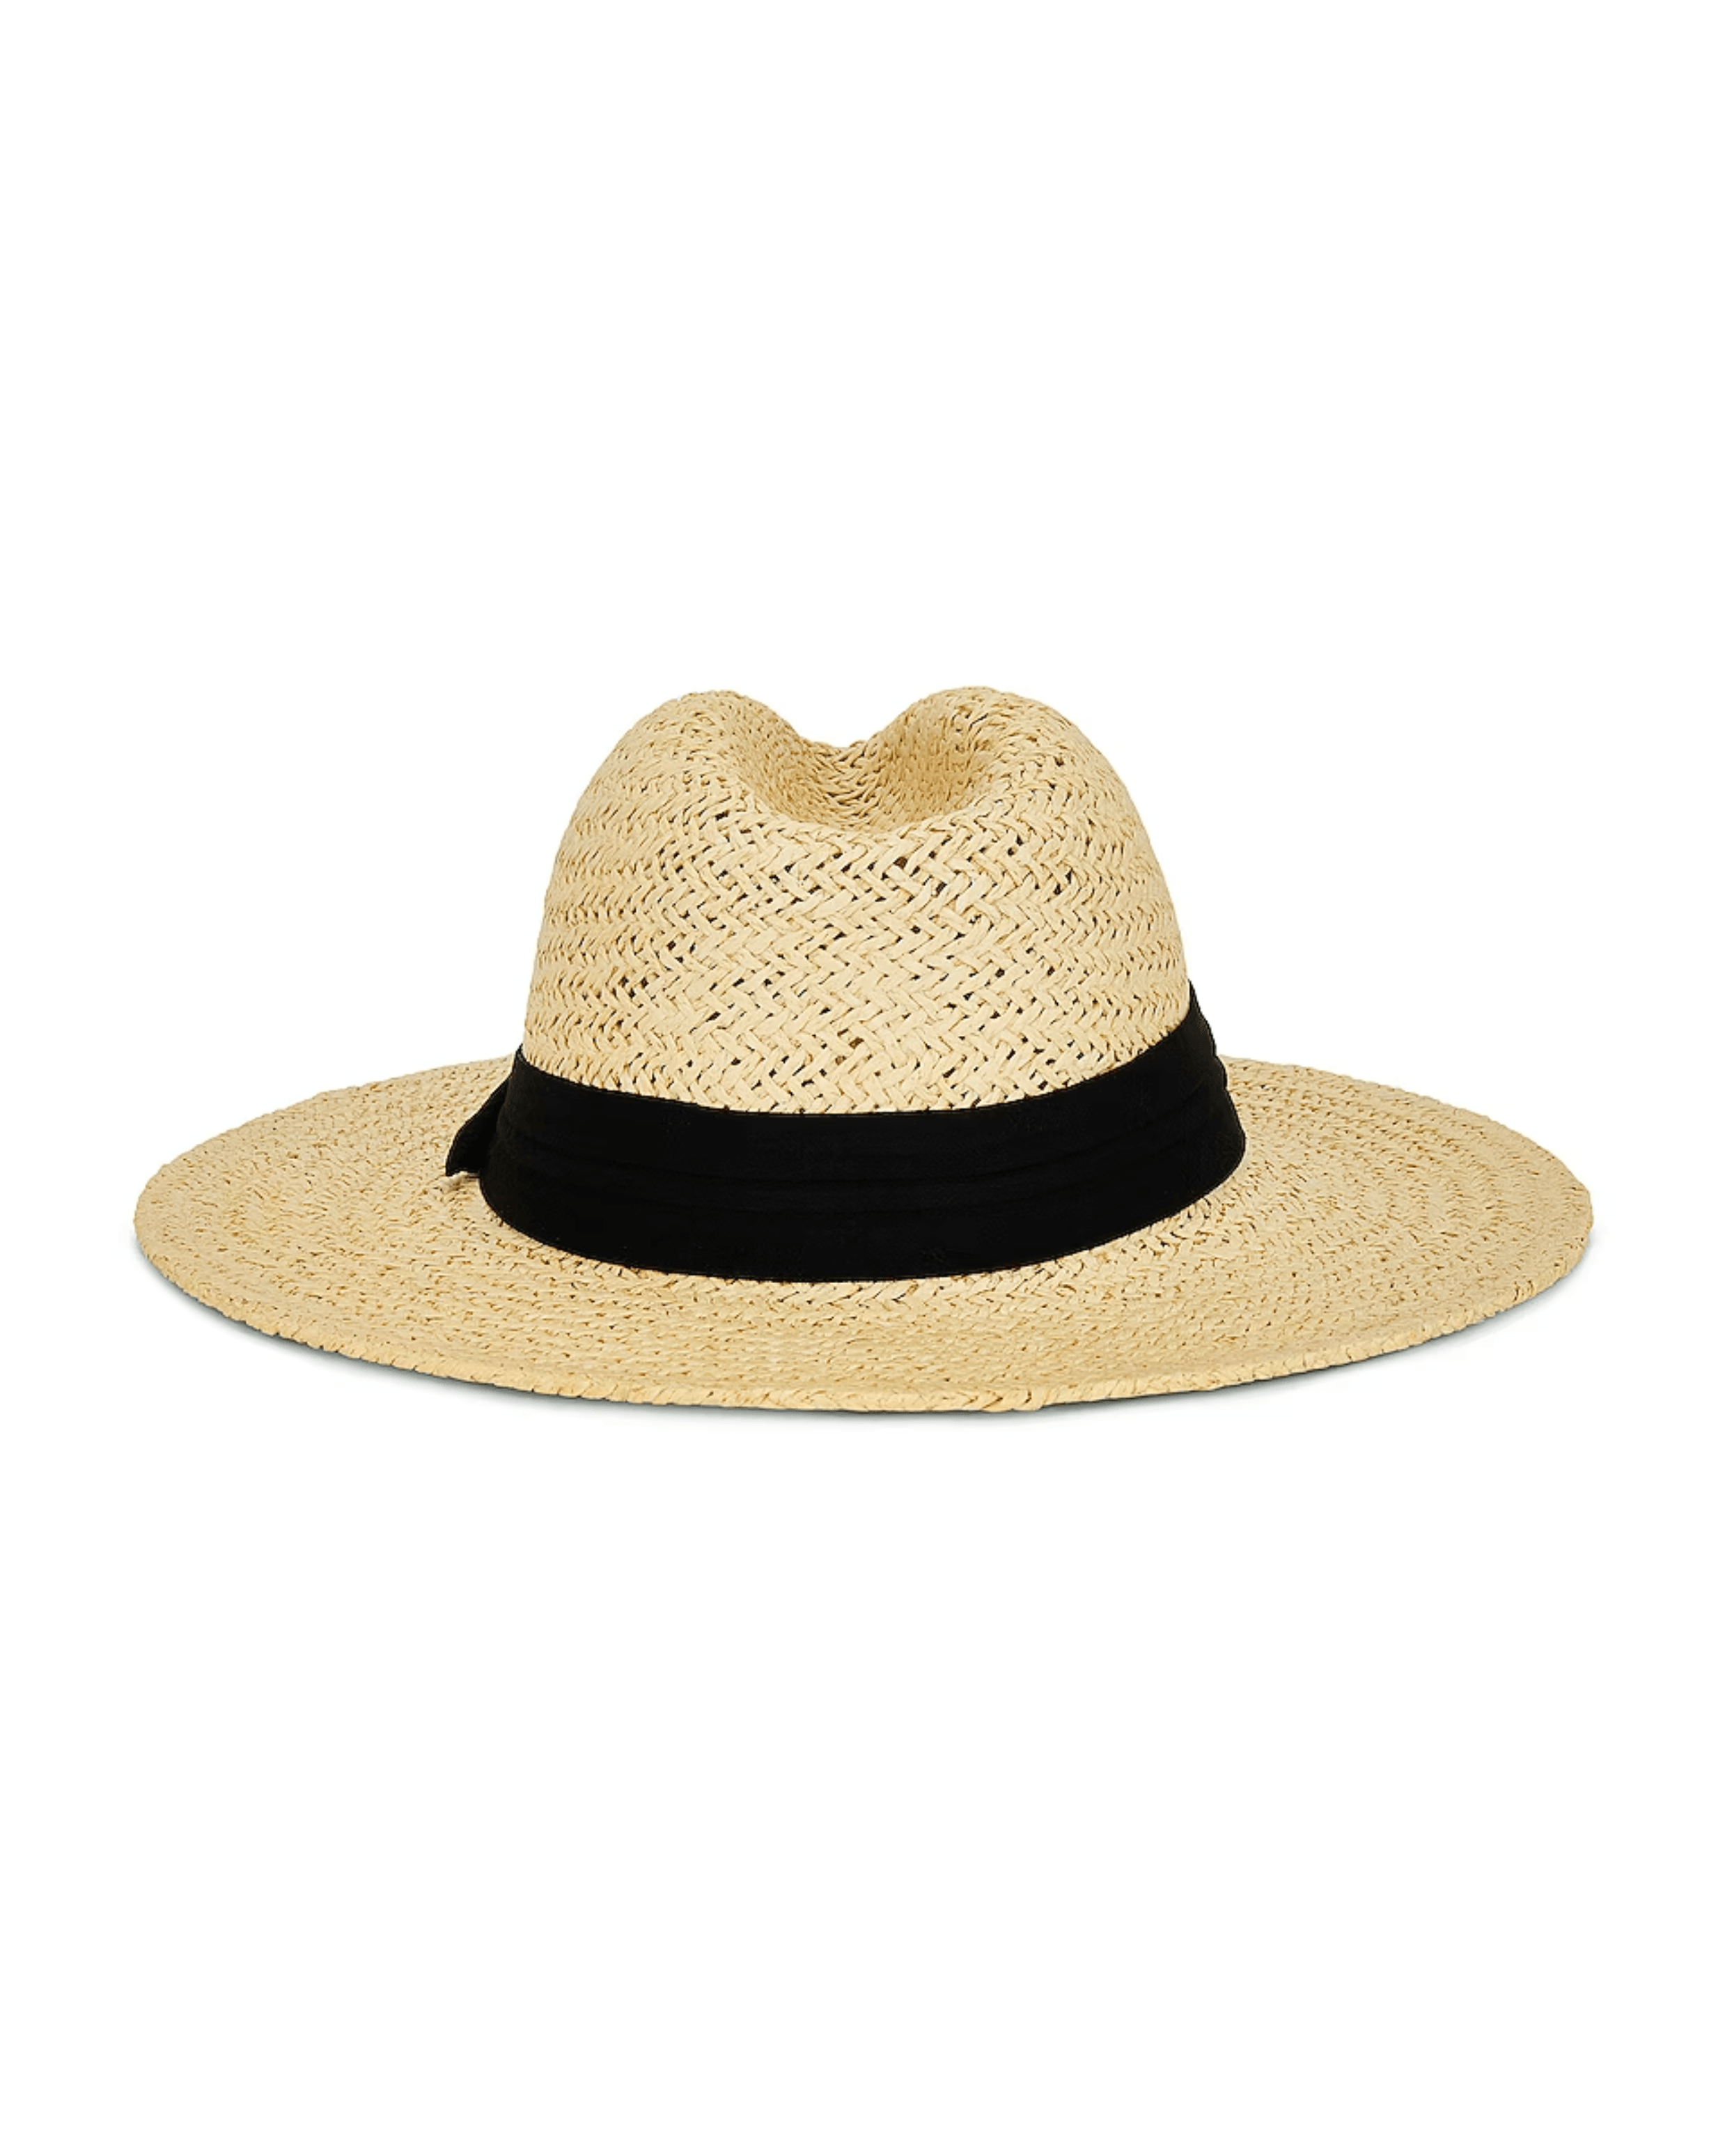 BRUNCH HAT - 8 Other Reasons